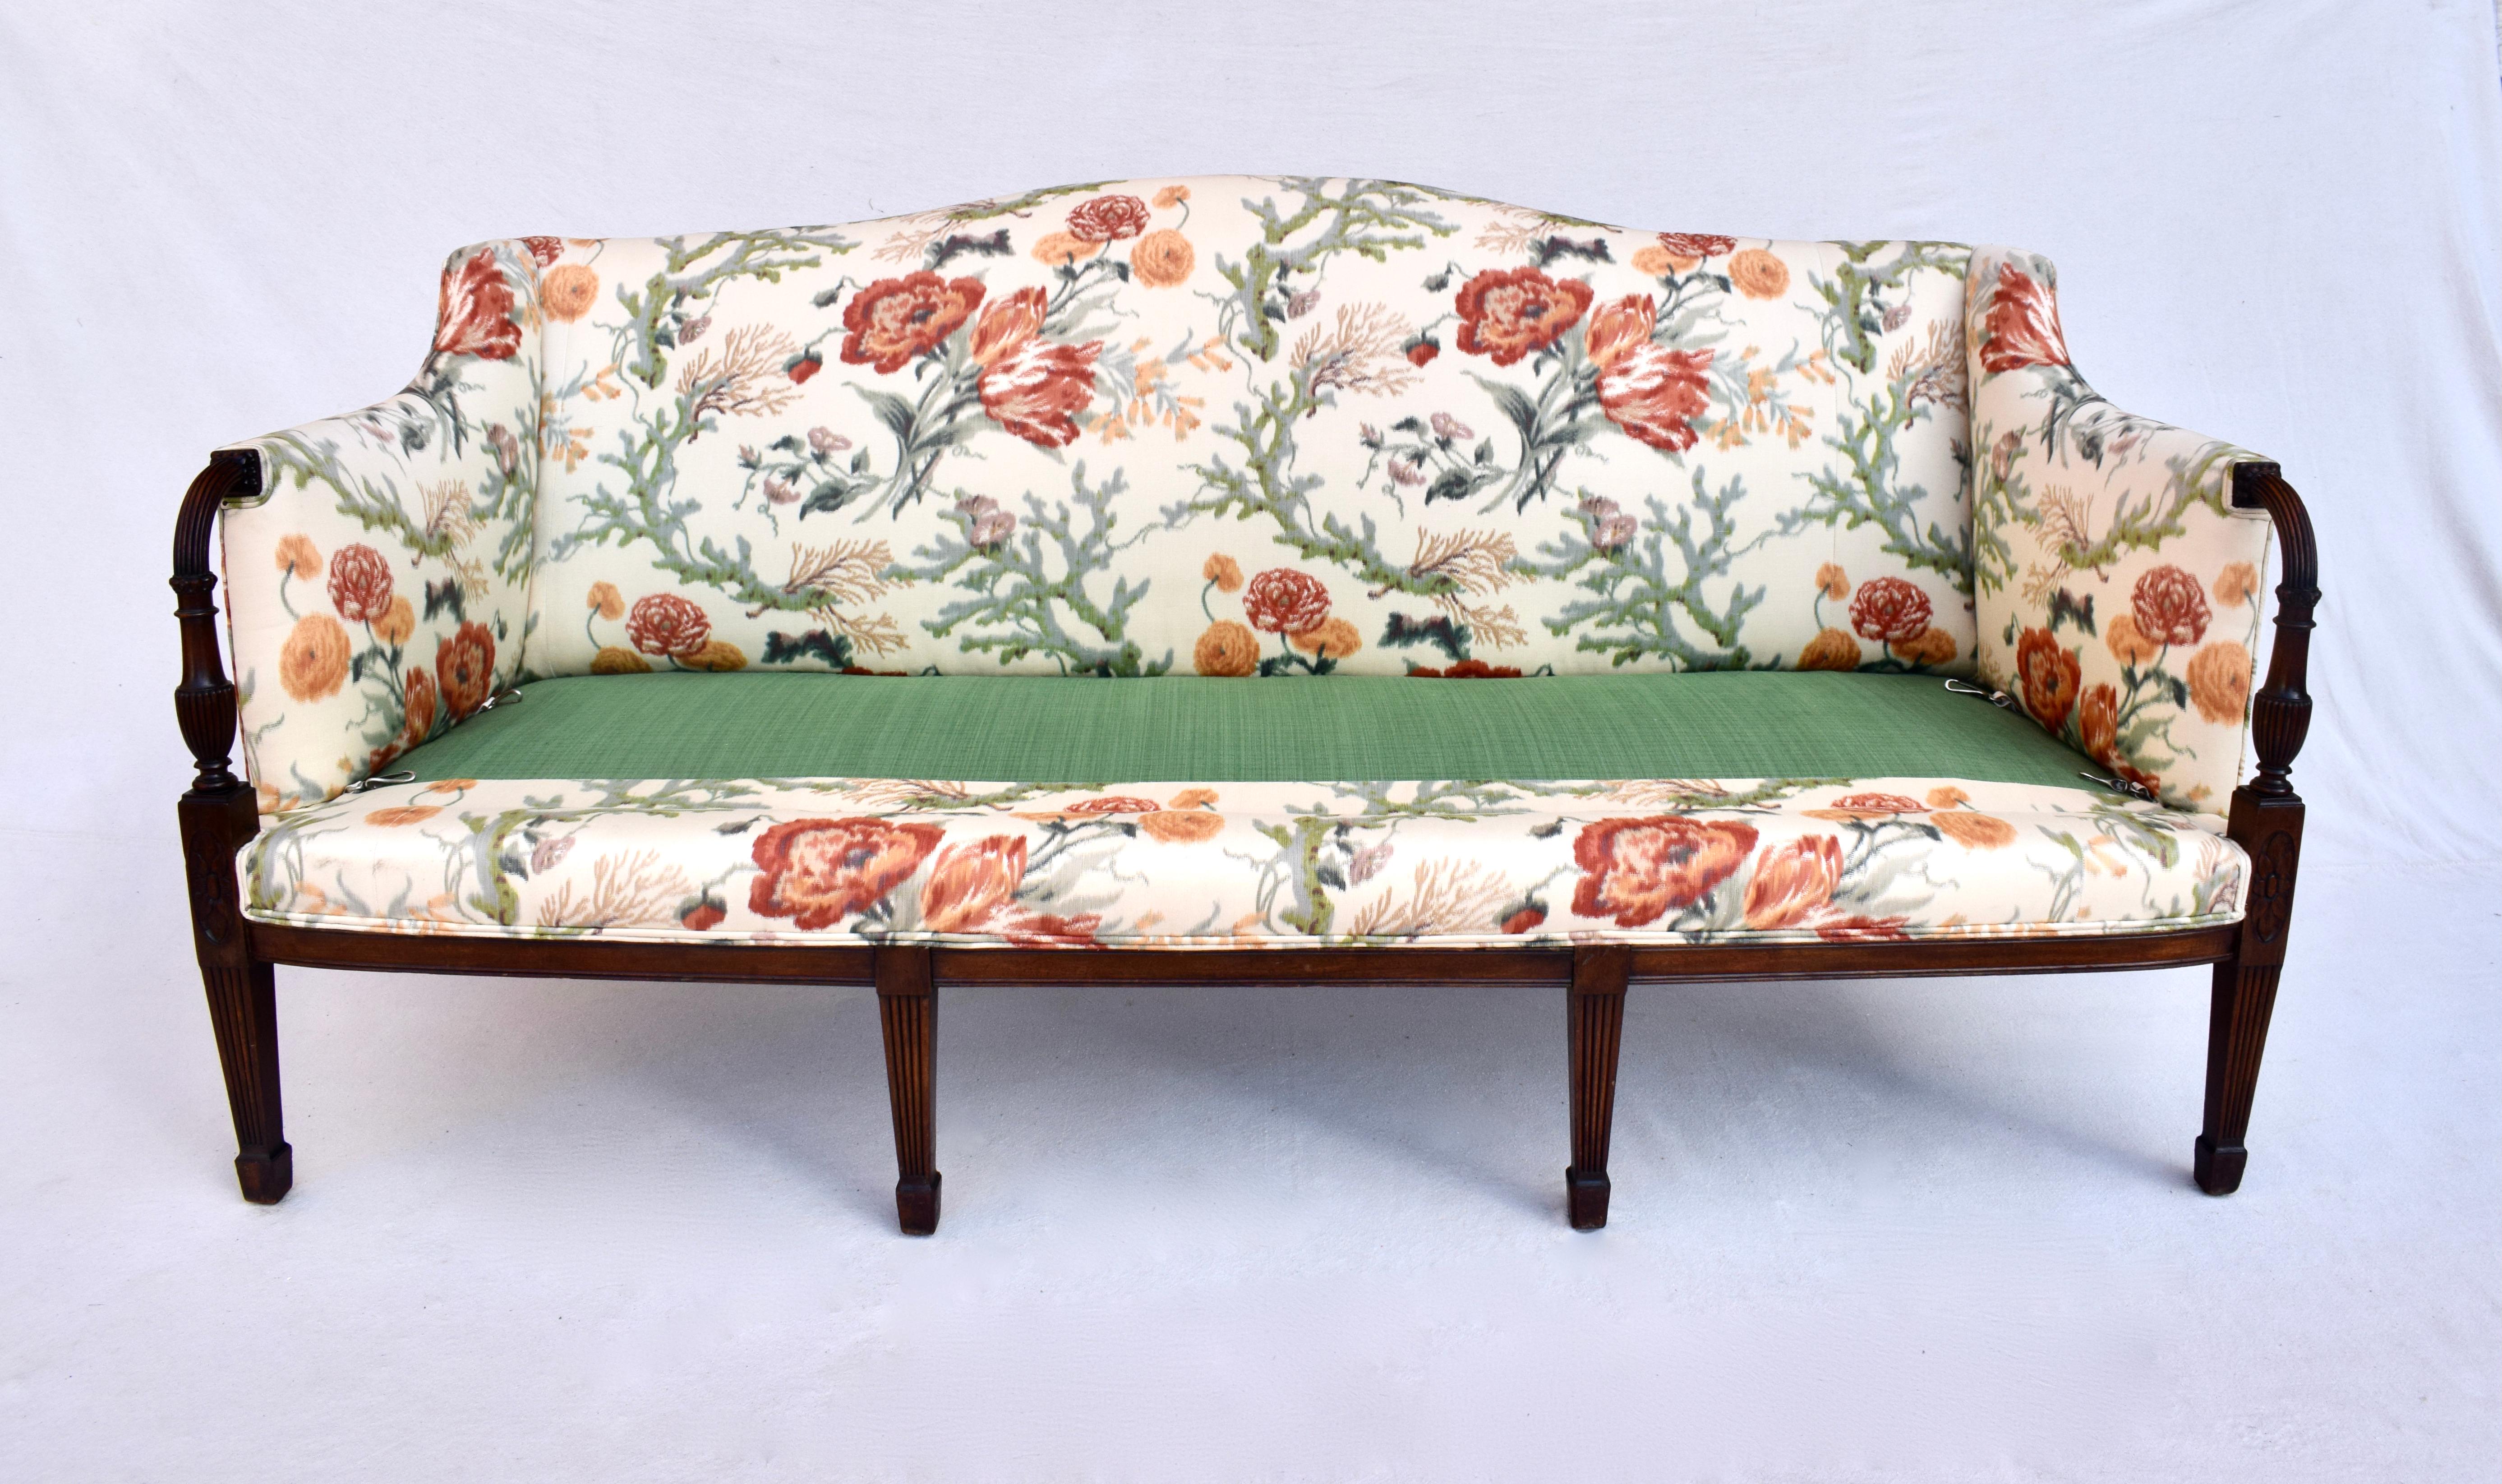 An exquisite 19th century solid mahogany wood framed Federal Sheraton style sofa with hand carvings throughout resting on eight legs. Reupholstered in Brunschwig & Fils Ikat floral featuring one single exceptionally plush goose down cushion in